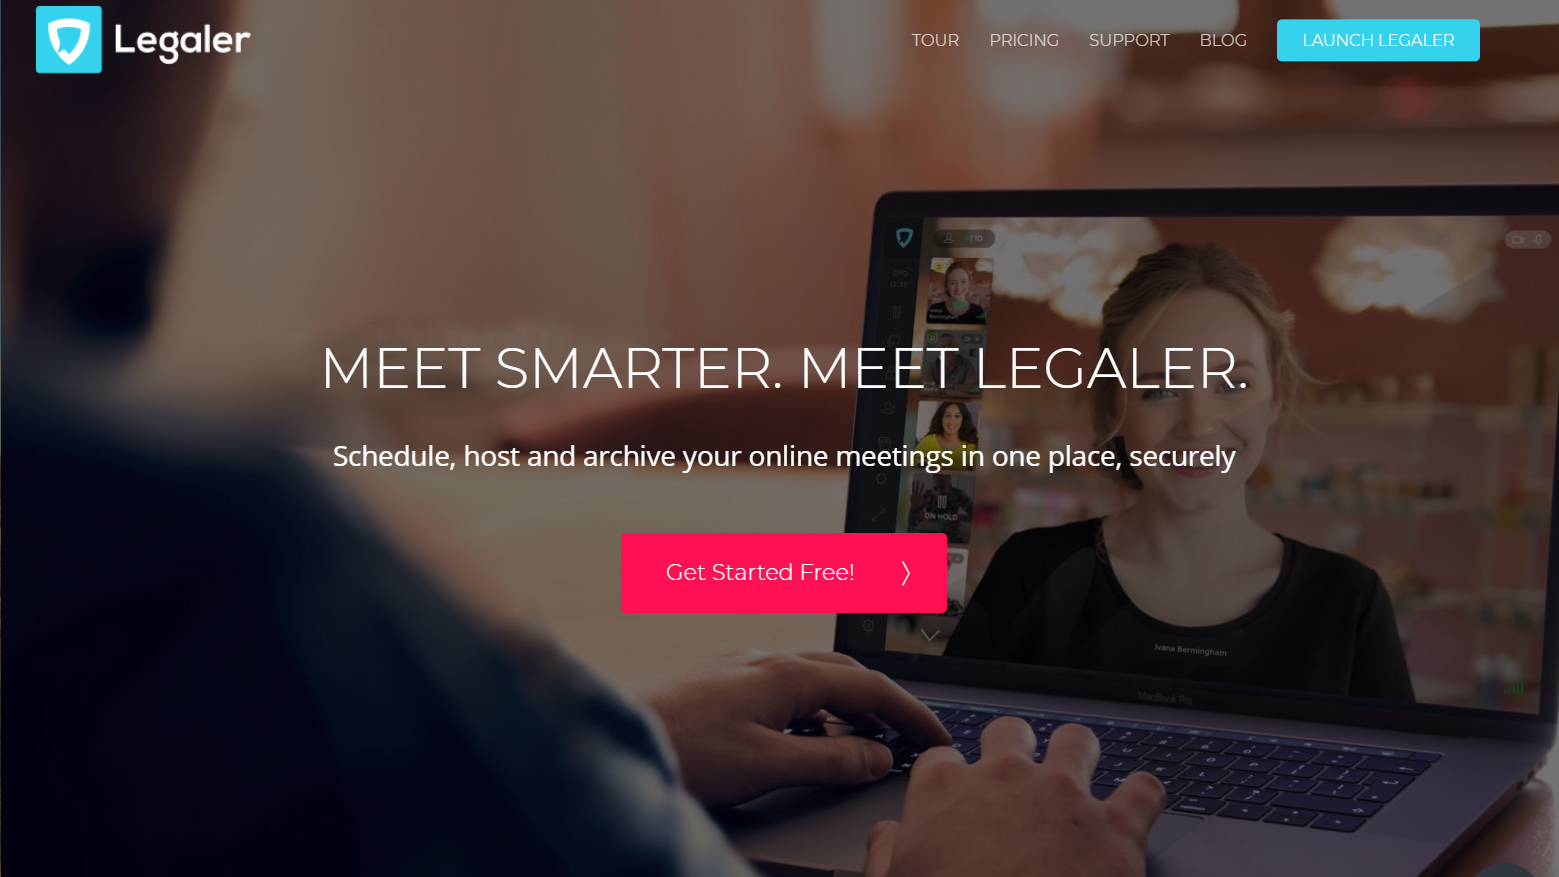 Amid Pandemic, Legaler Offers Its Video Meeting Service Free to Solo/Small Firms